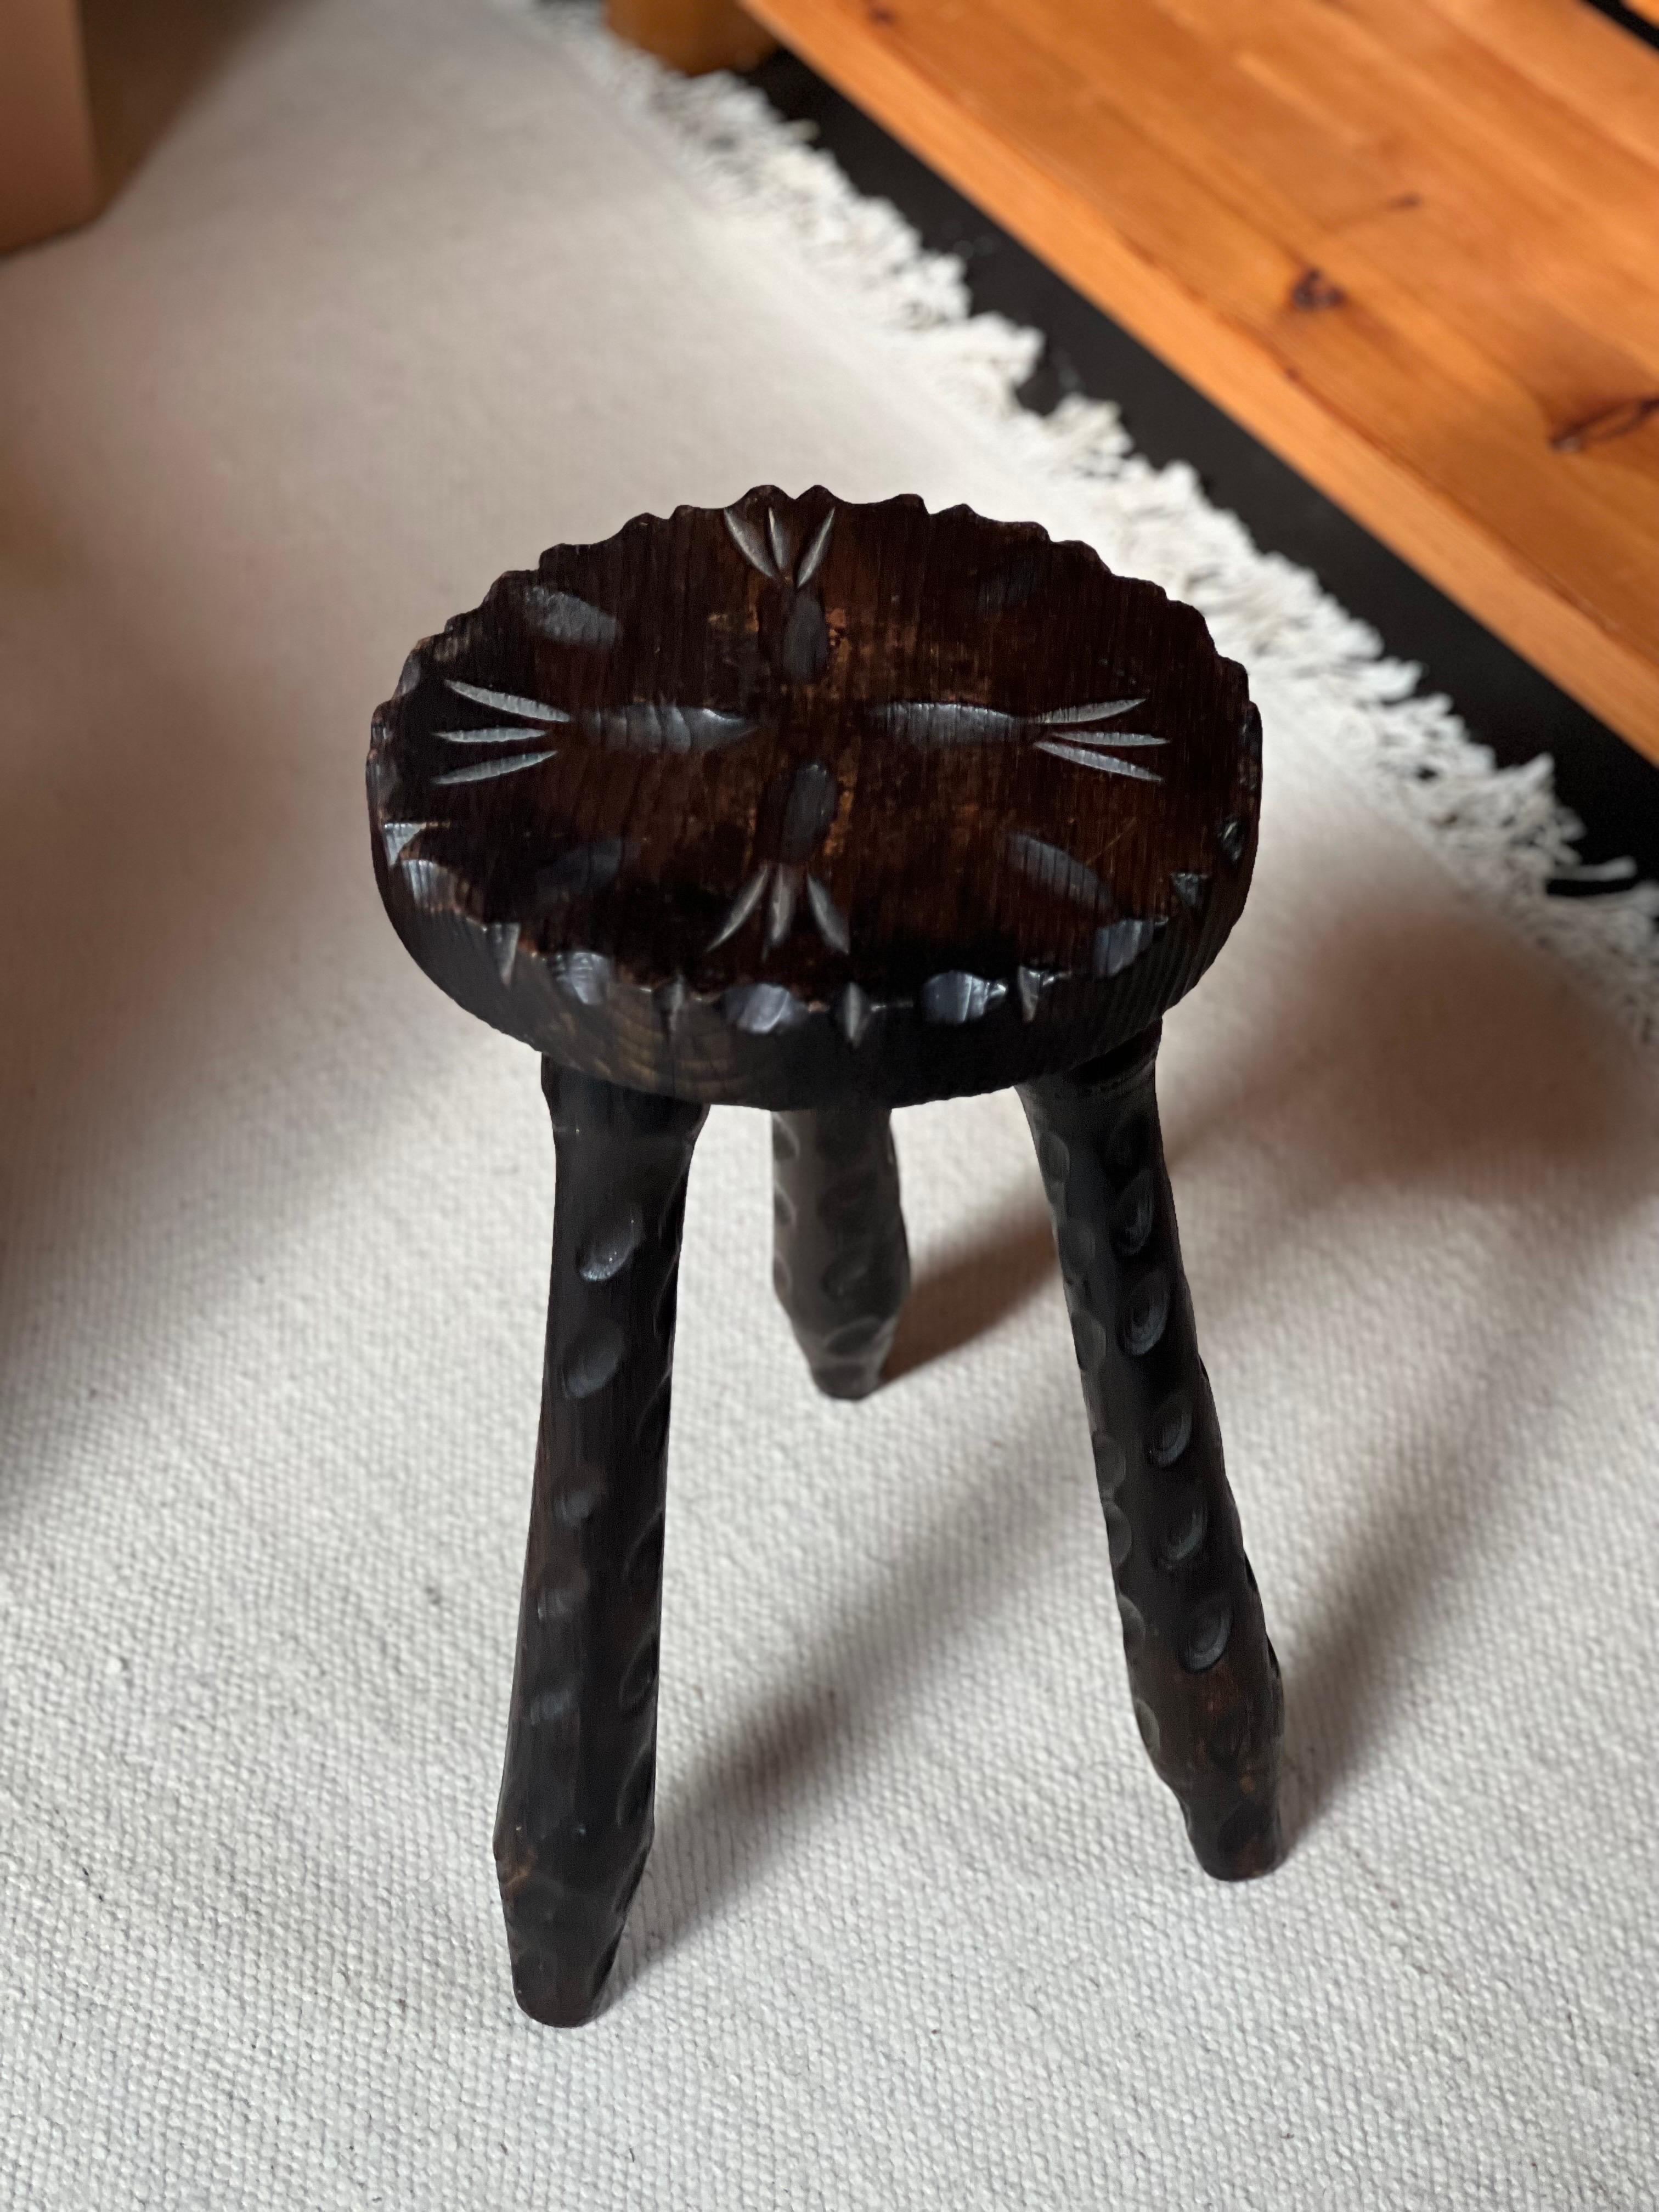 Very decorative massive pinewood stained stool. This tripod stool is show nice details. Made in Spain in the 60's. Nice little addition to your interior. 


________________________________________________________
L'architecture brutaliste est un